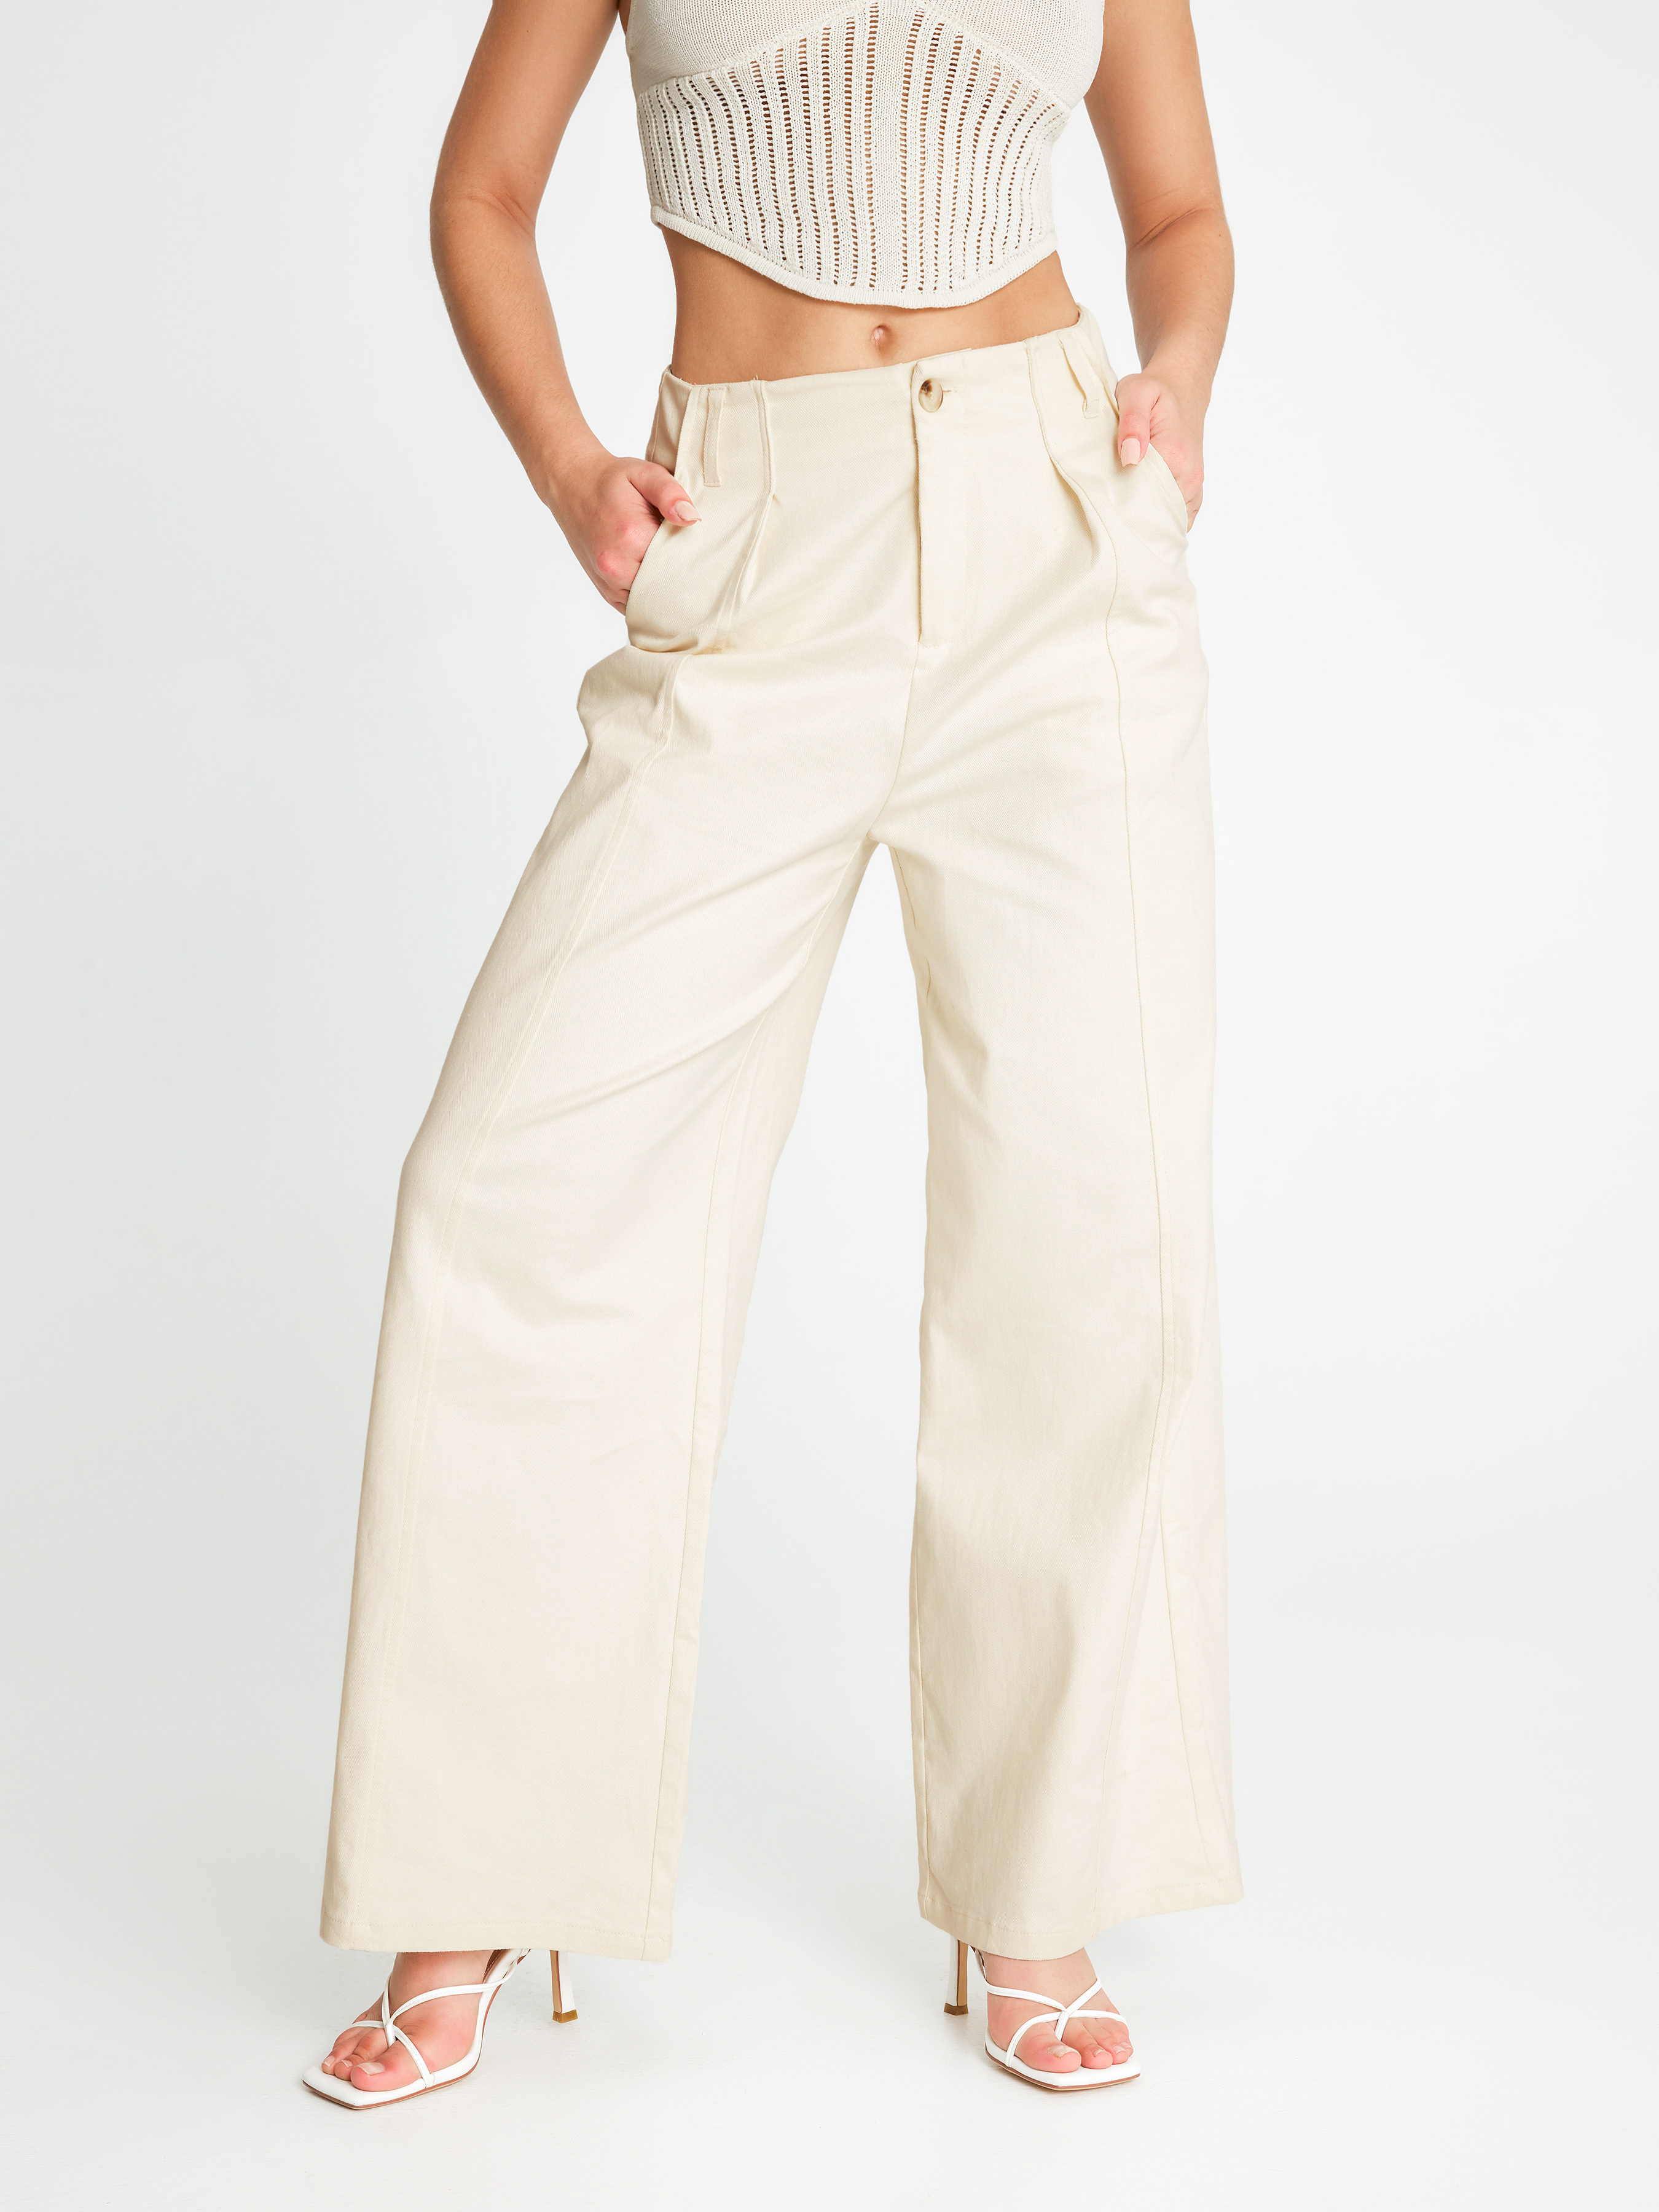 Solid Stitch Straight Leg Trousers - Cider